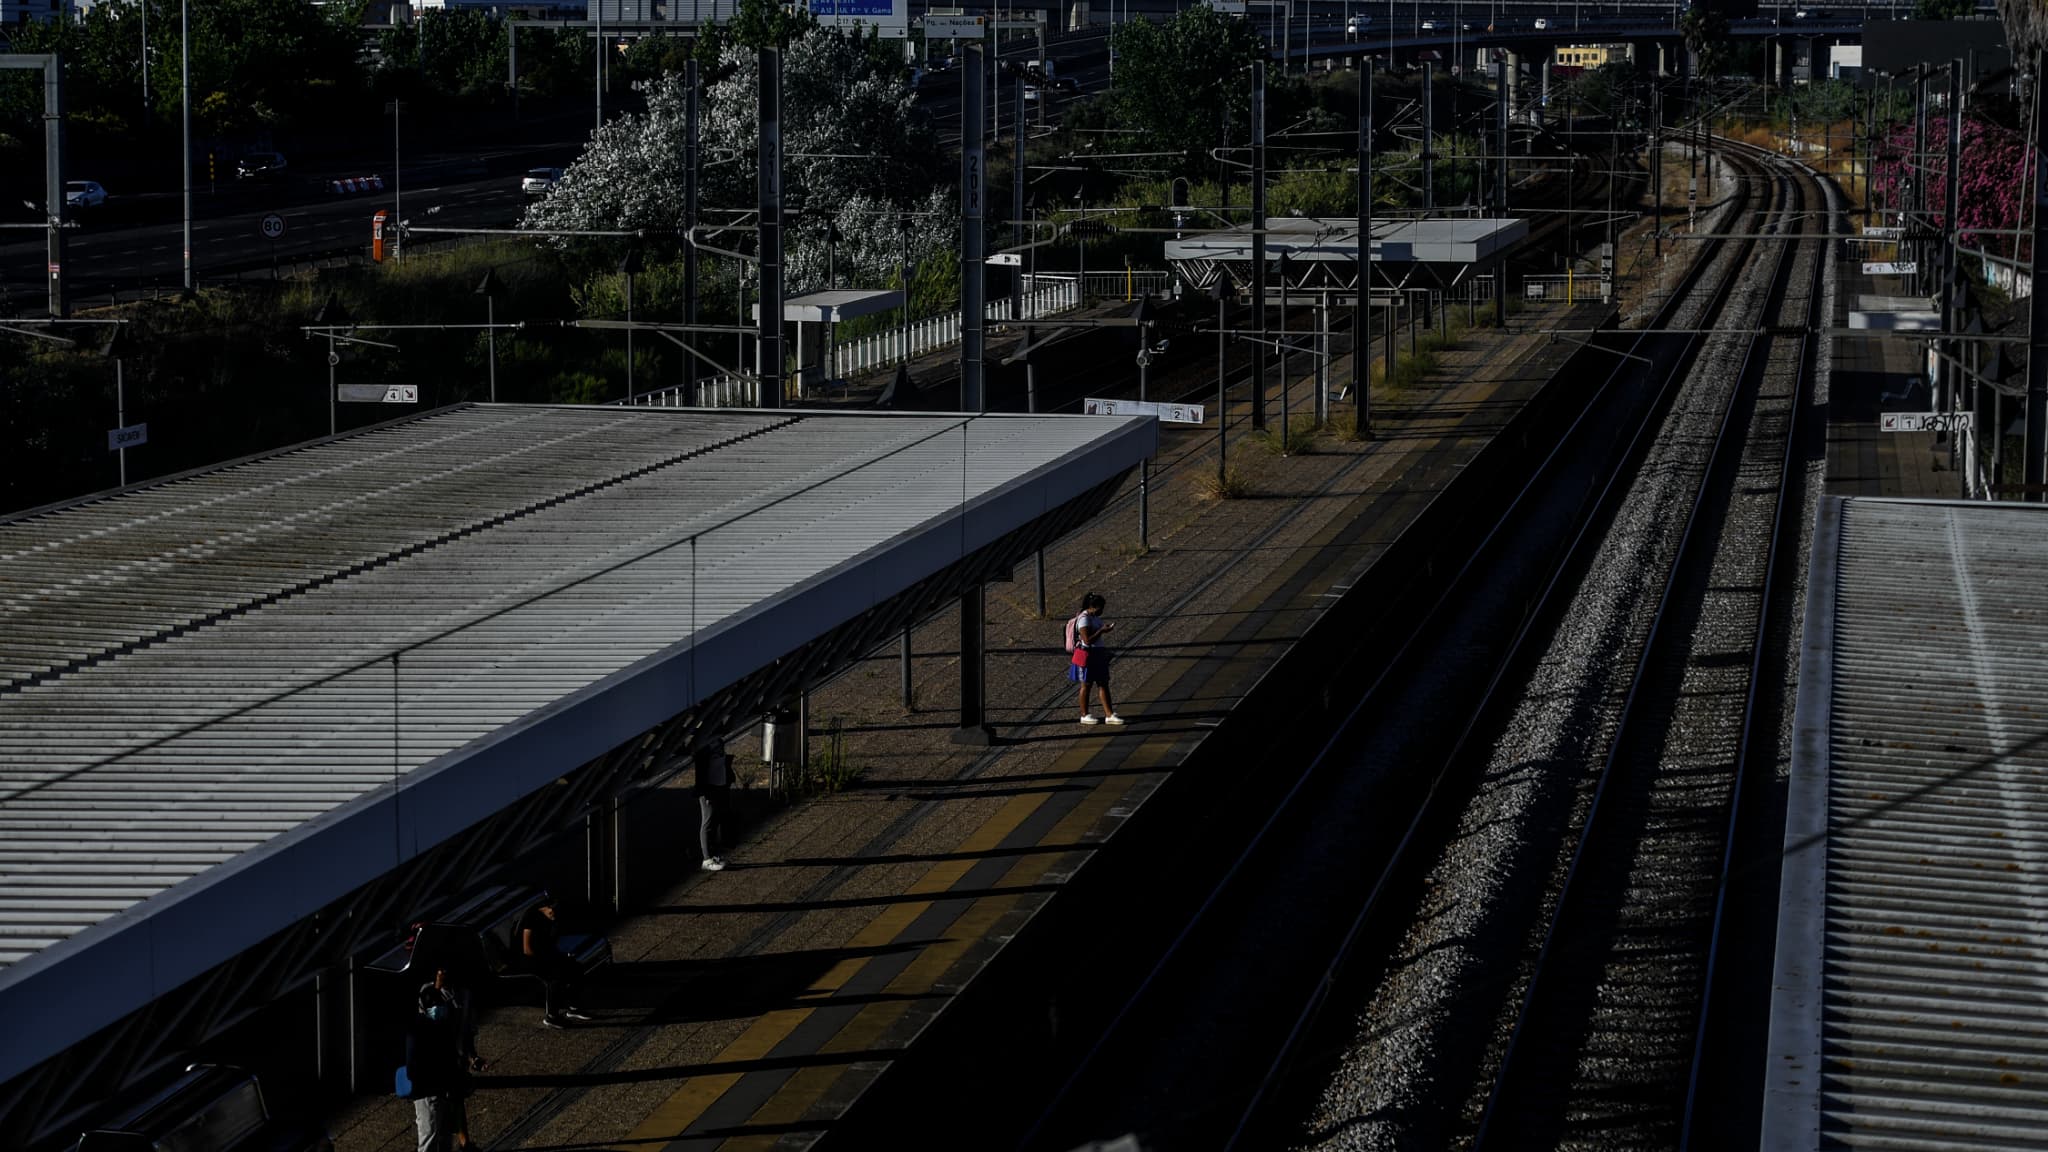 In Portugal, hundreds of trains were canceled due to the strike